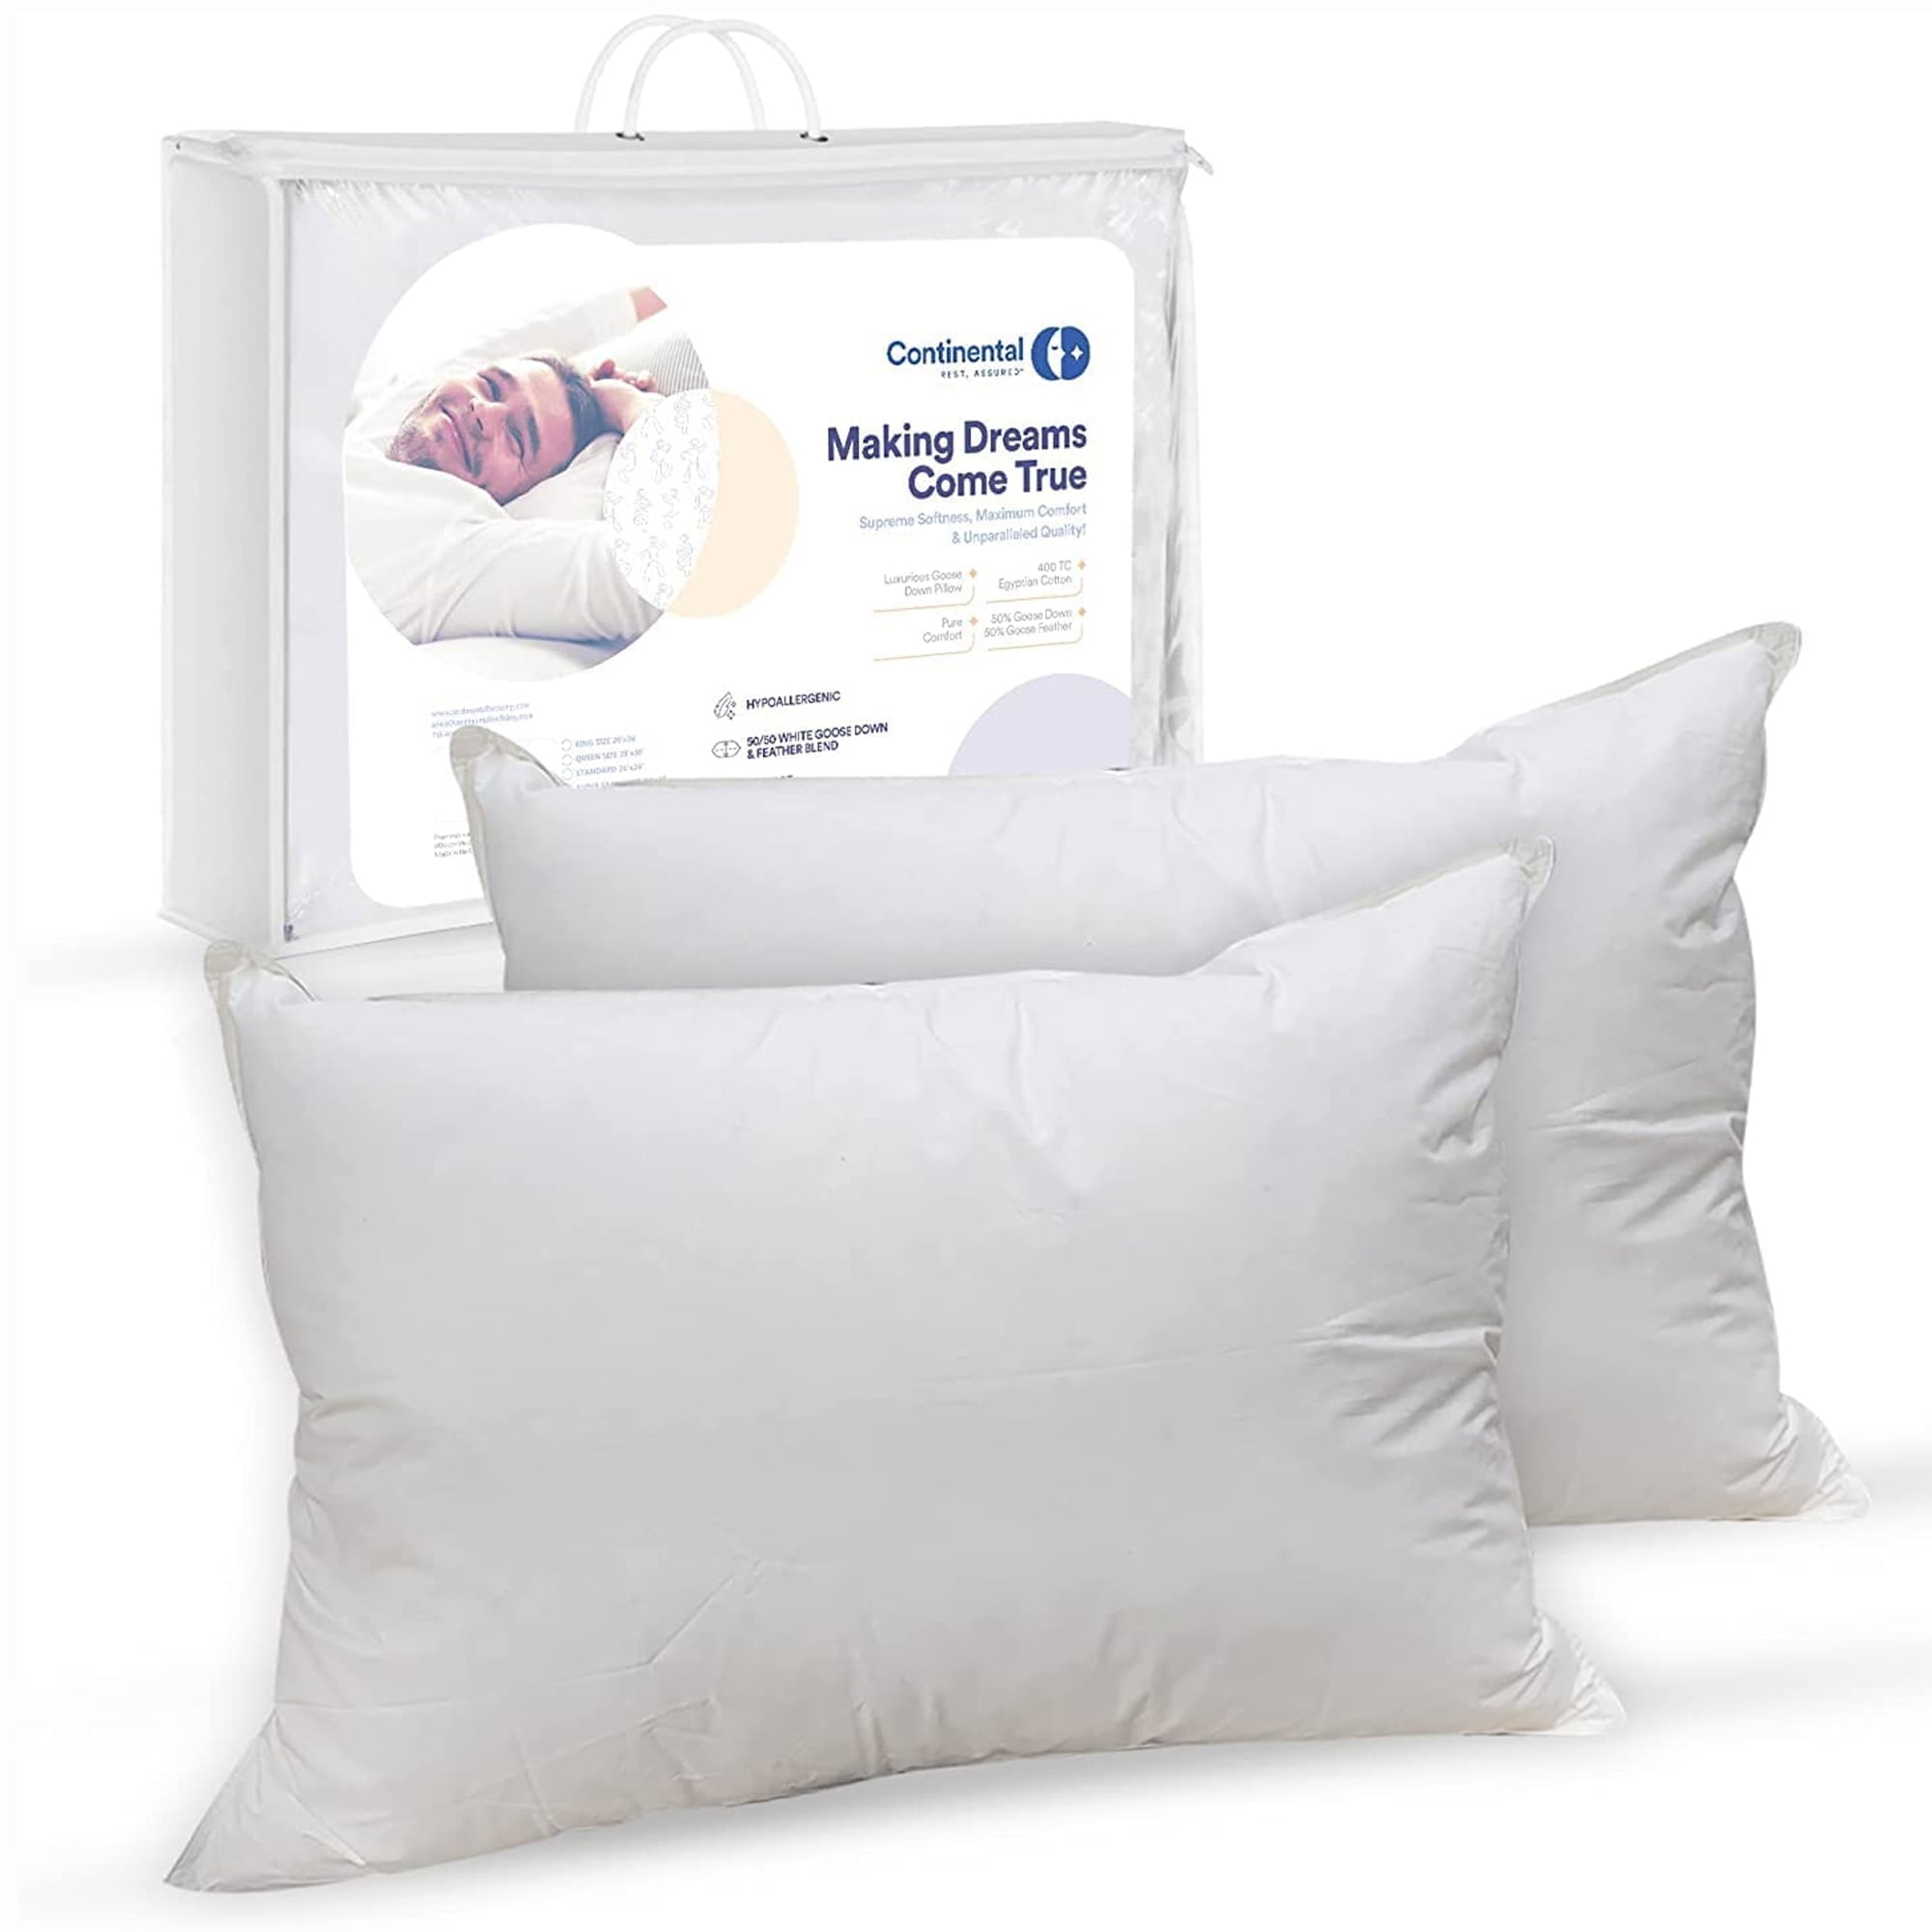 Down vs Synthetic: What Makes a Superior Pillow? - DOWNLITE